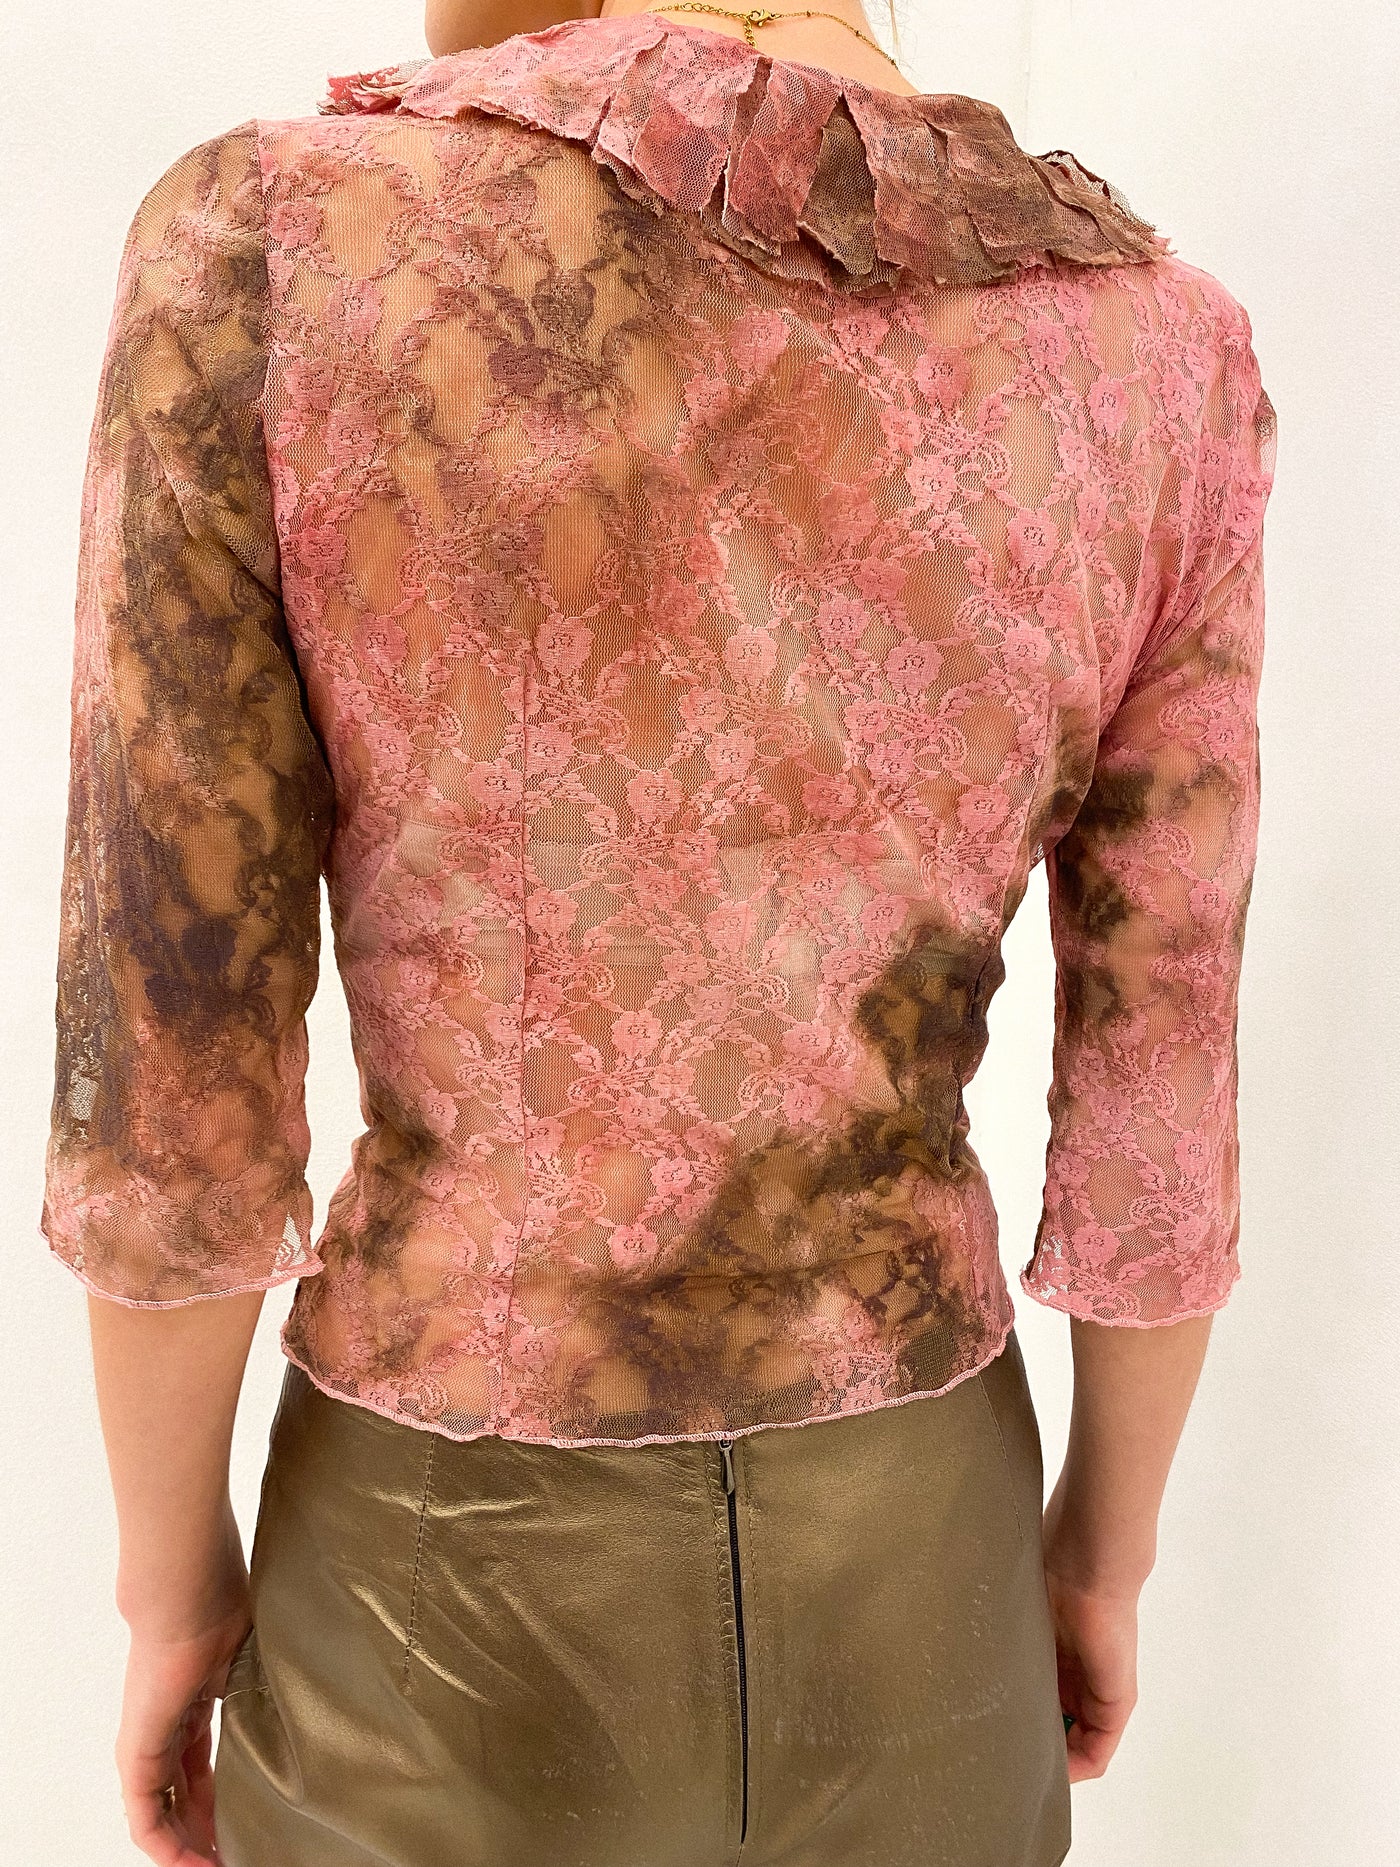 Ombre Lace Sheer Blouse UK 8 - 10